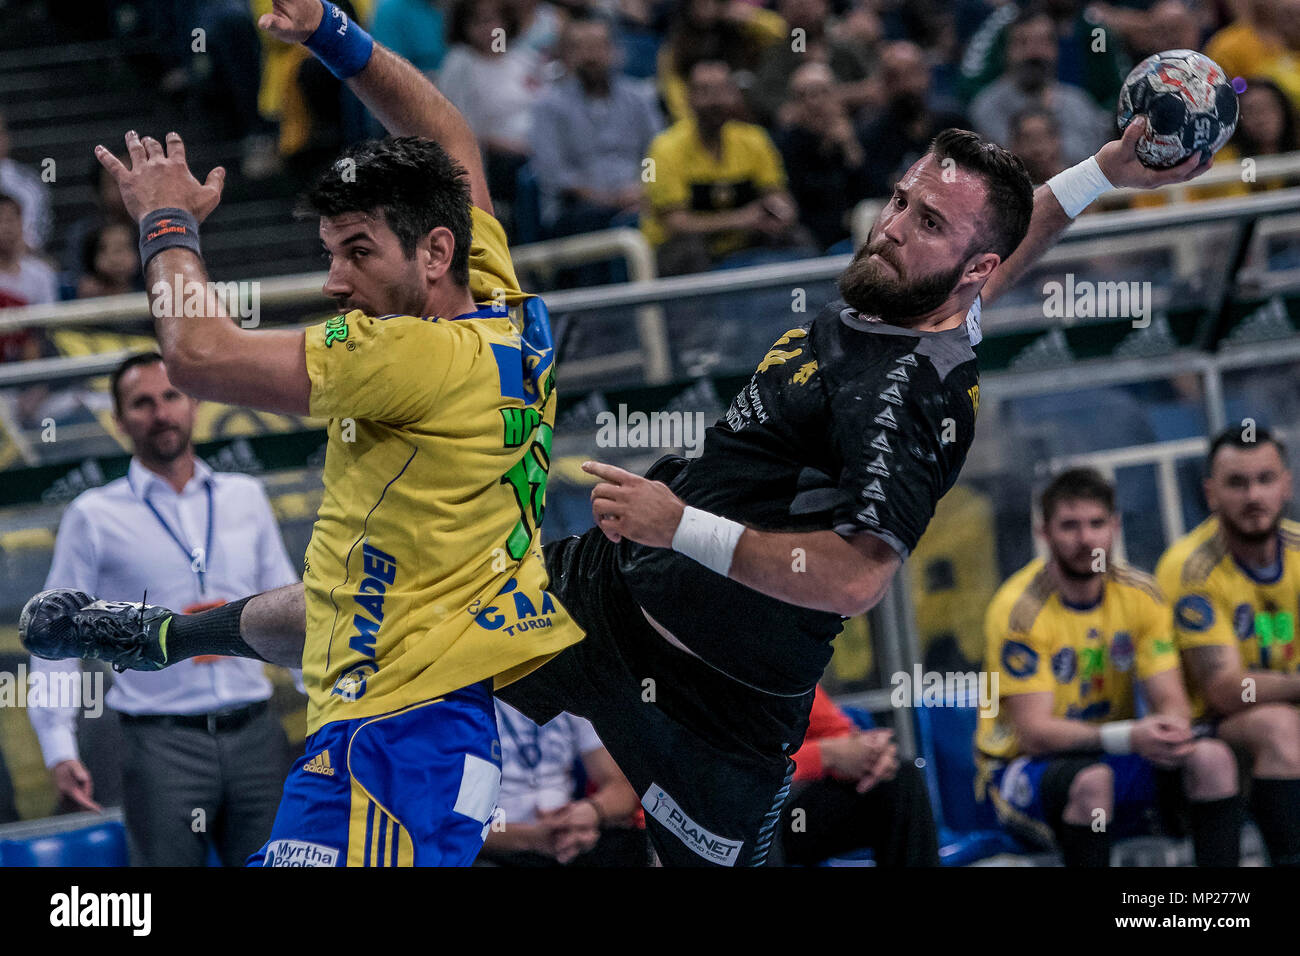 Athens, Greece. 20th May, 2018. A.E.K.'s Eldin Vrazalica (R) competes during the EHF Men's Challenge Cup Finals between A.E.K. Athens and AHC Potaissa Turda in Athens, Greece, May 20, 2018. Credit: Panagiotis Moschandreou/Xinhua/Alamy Live News Stock Photo